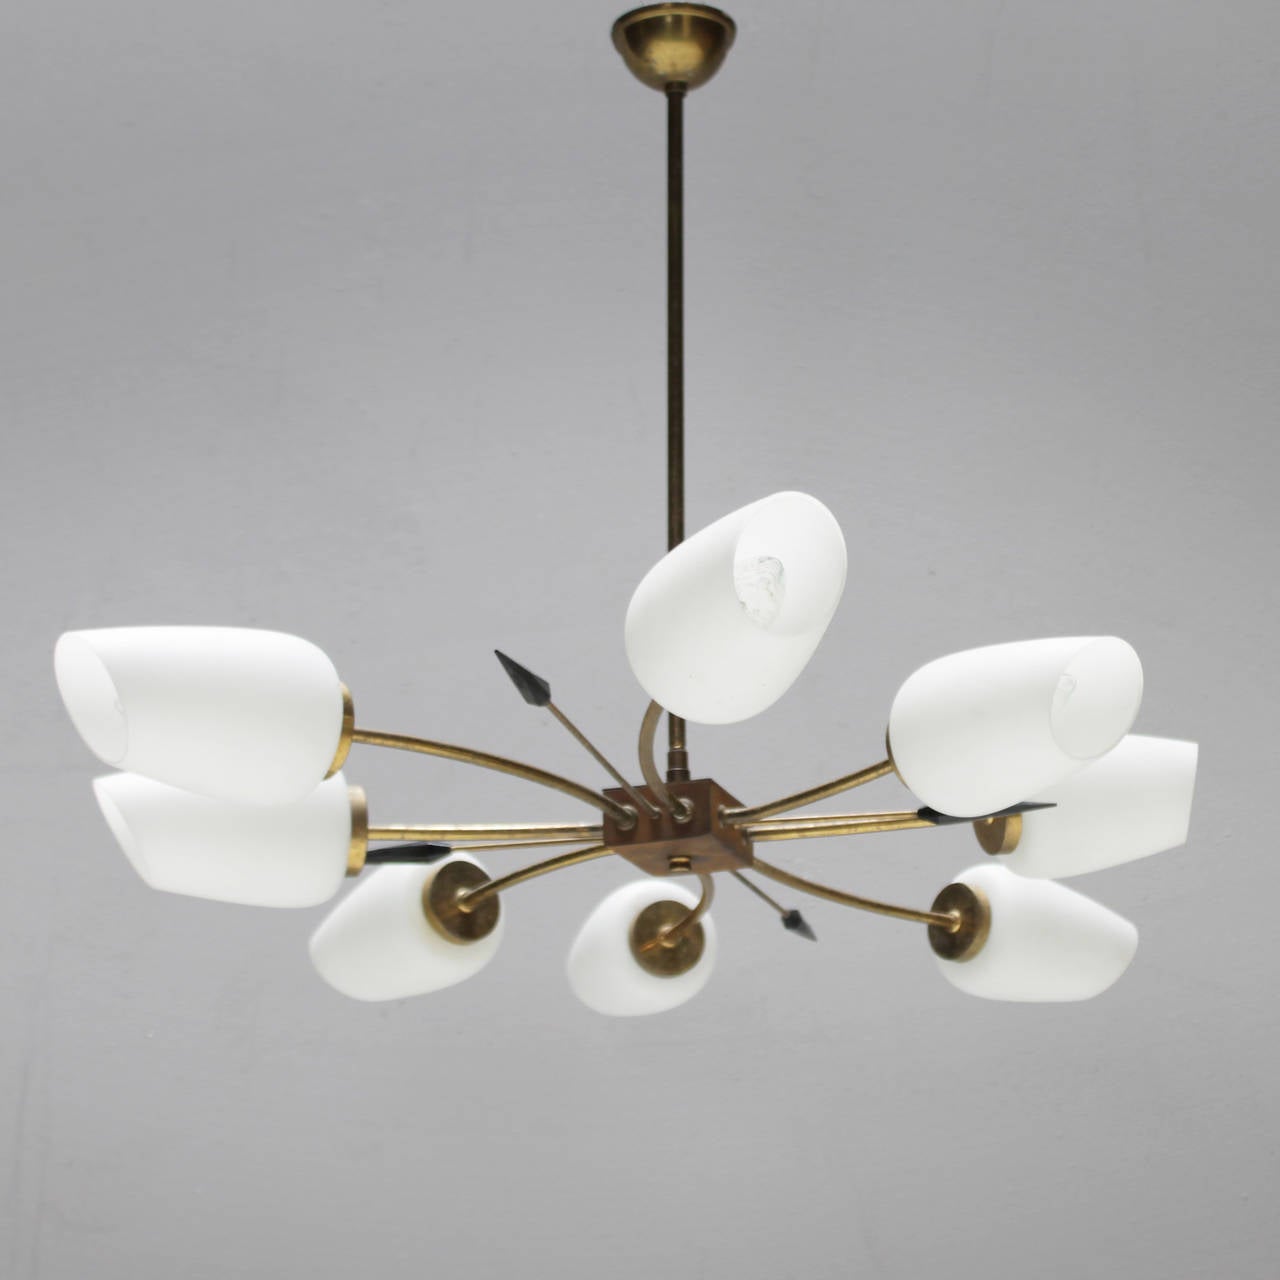 Chandelier from the fifties in the style of Stilnovo, Italy. Eight burners, each with a diffuser made ​​of white opaline glass. Some rust and and lost of gilt but overall with a beautiful patina.
Measurements: height 18.5 in. (47 cm), depth 33.8